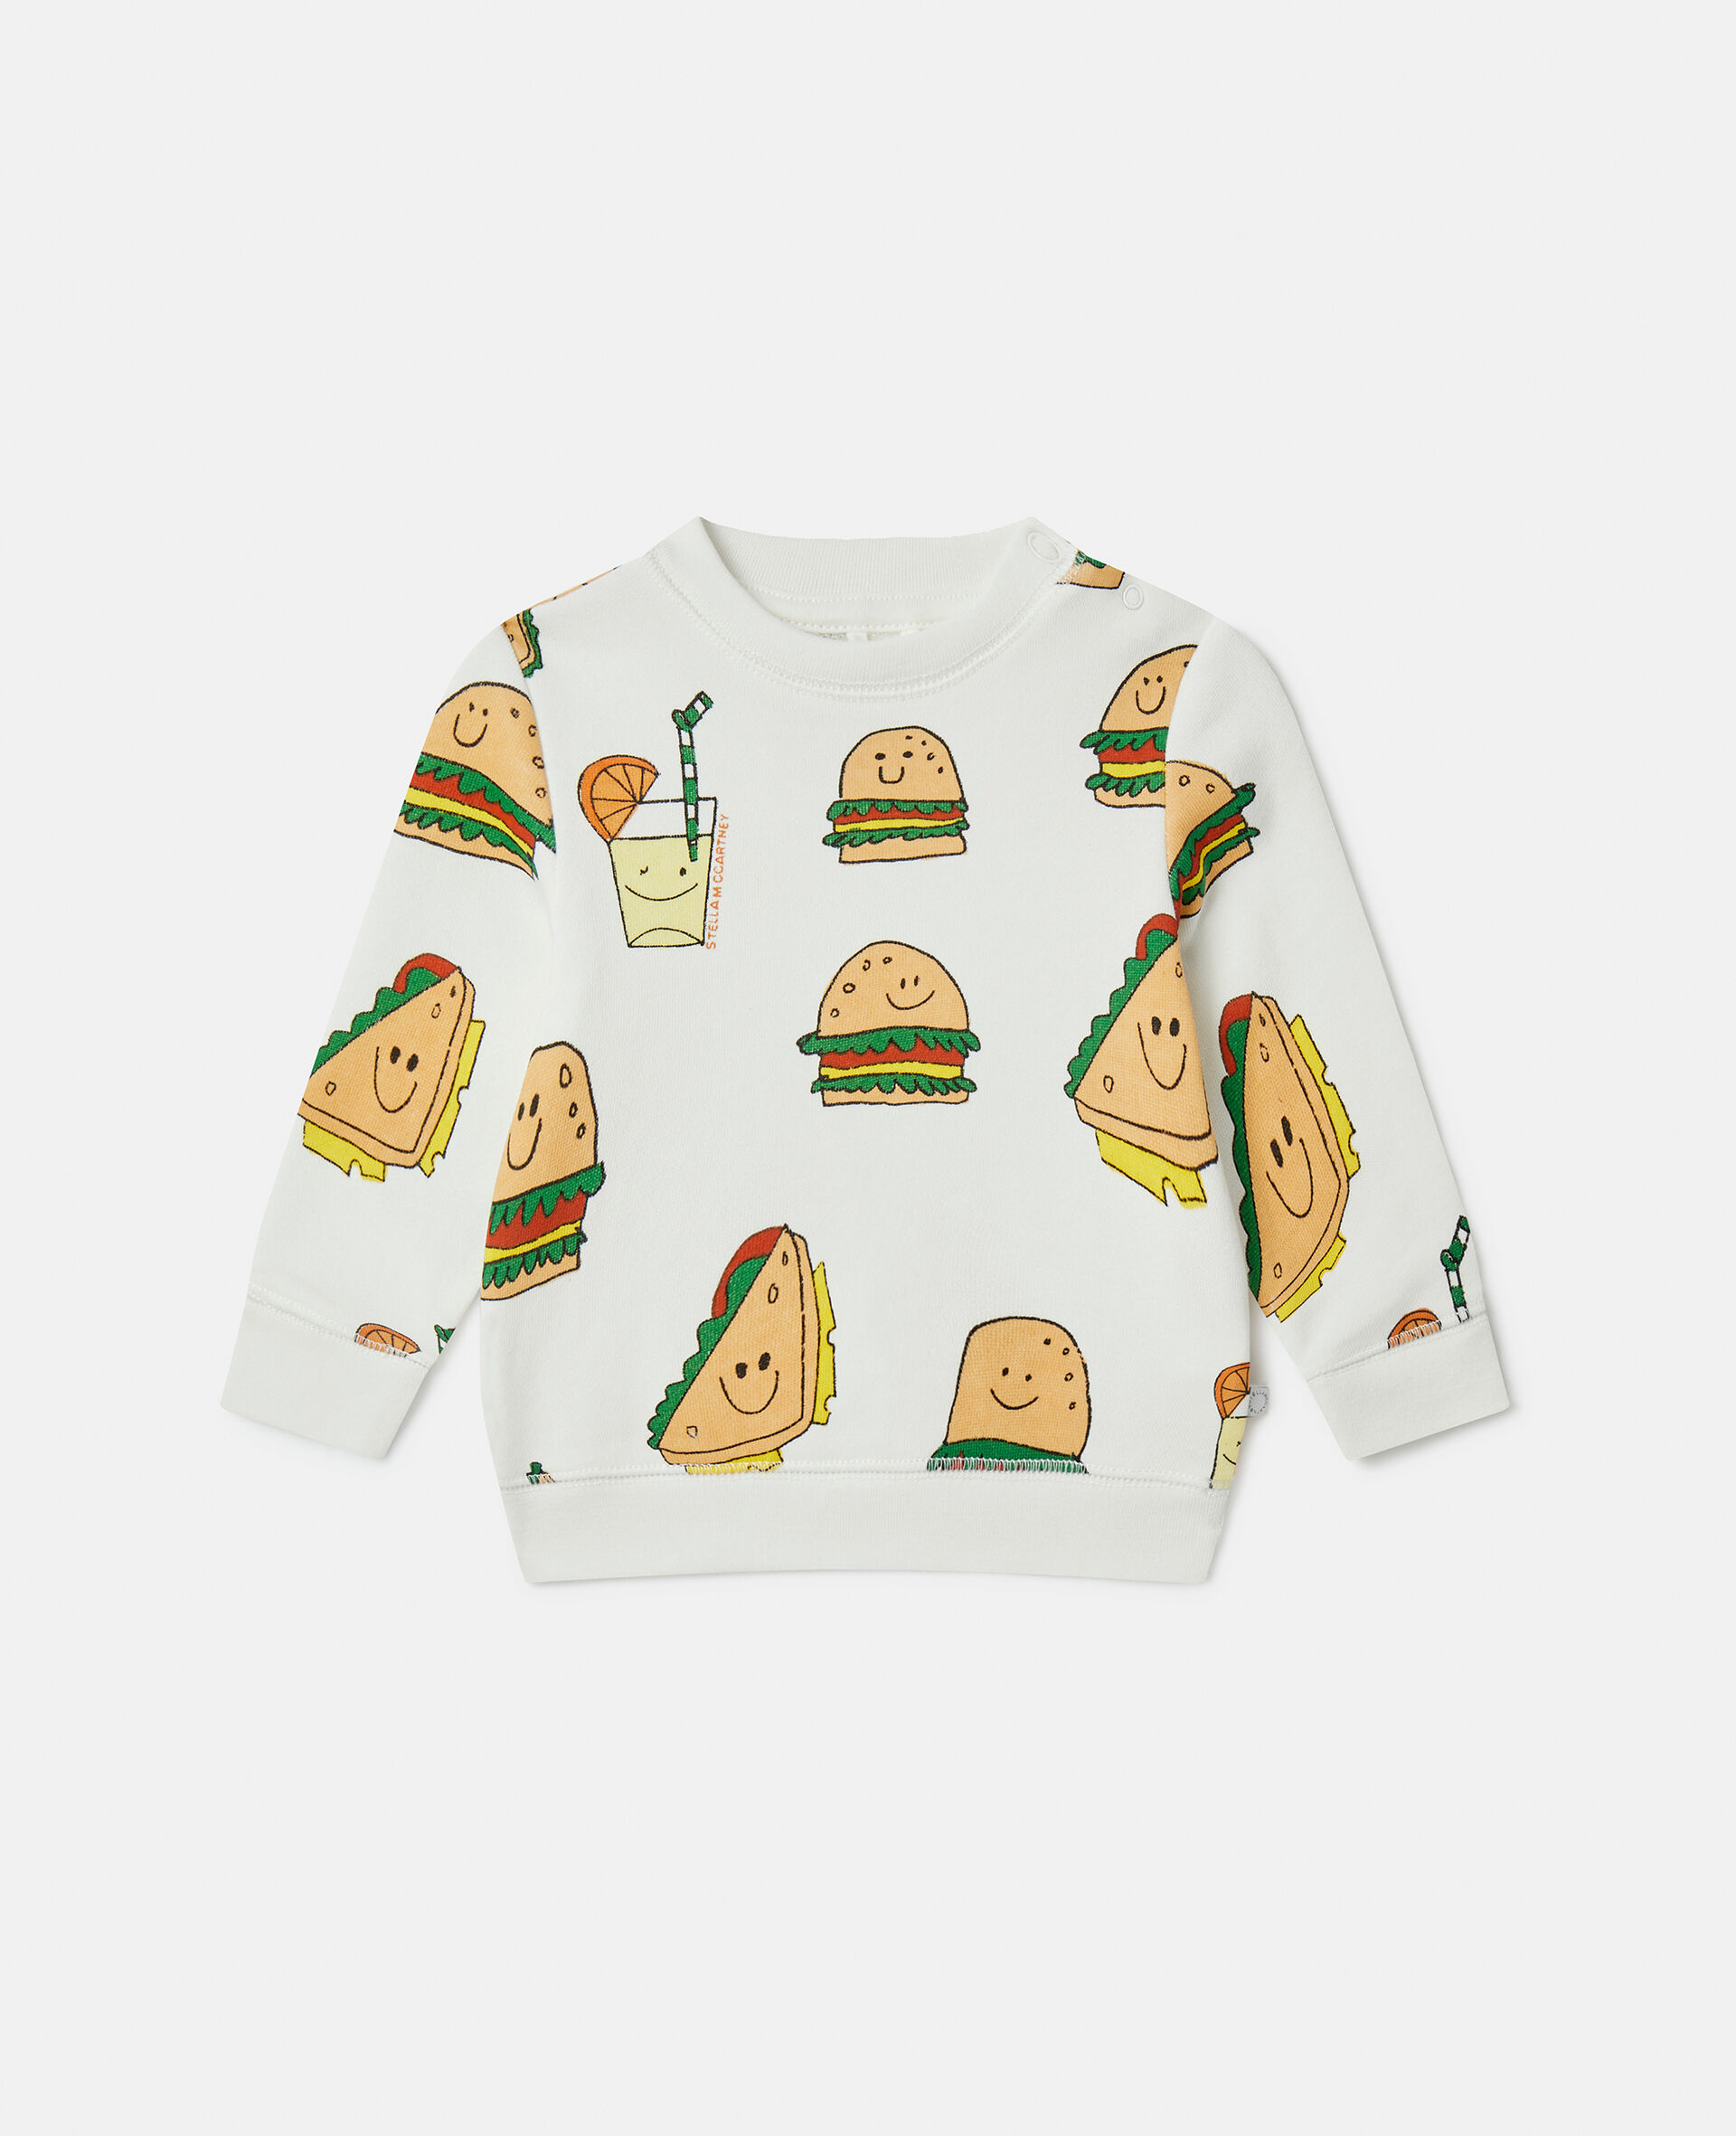 Silly Sandwich Print Sweatshirt-Multicolour-large image number 0